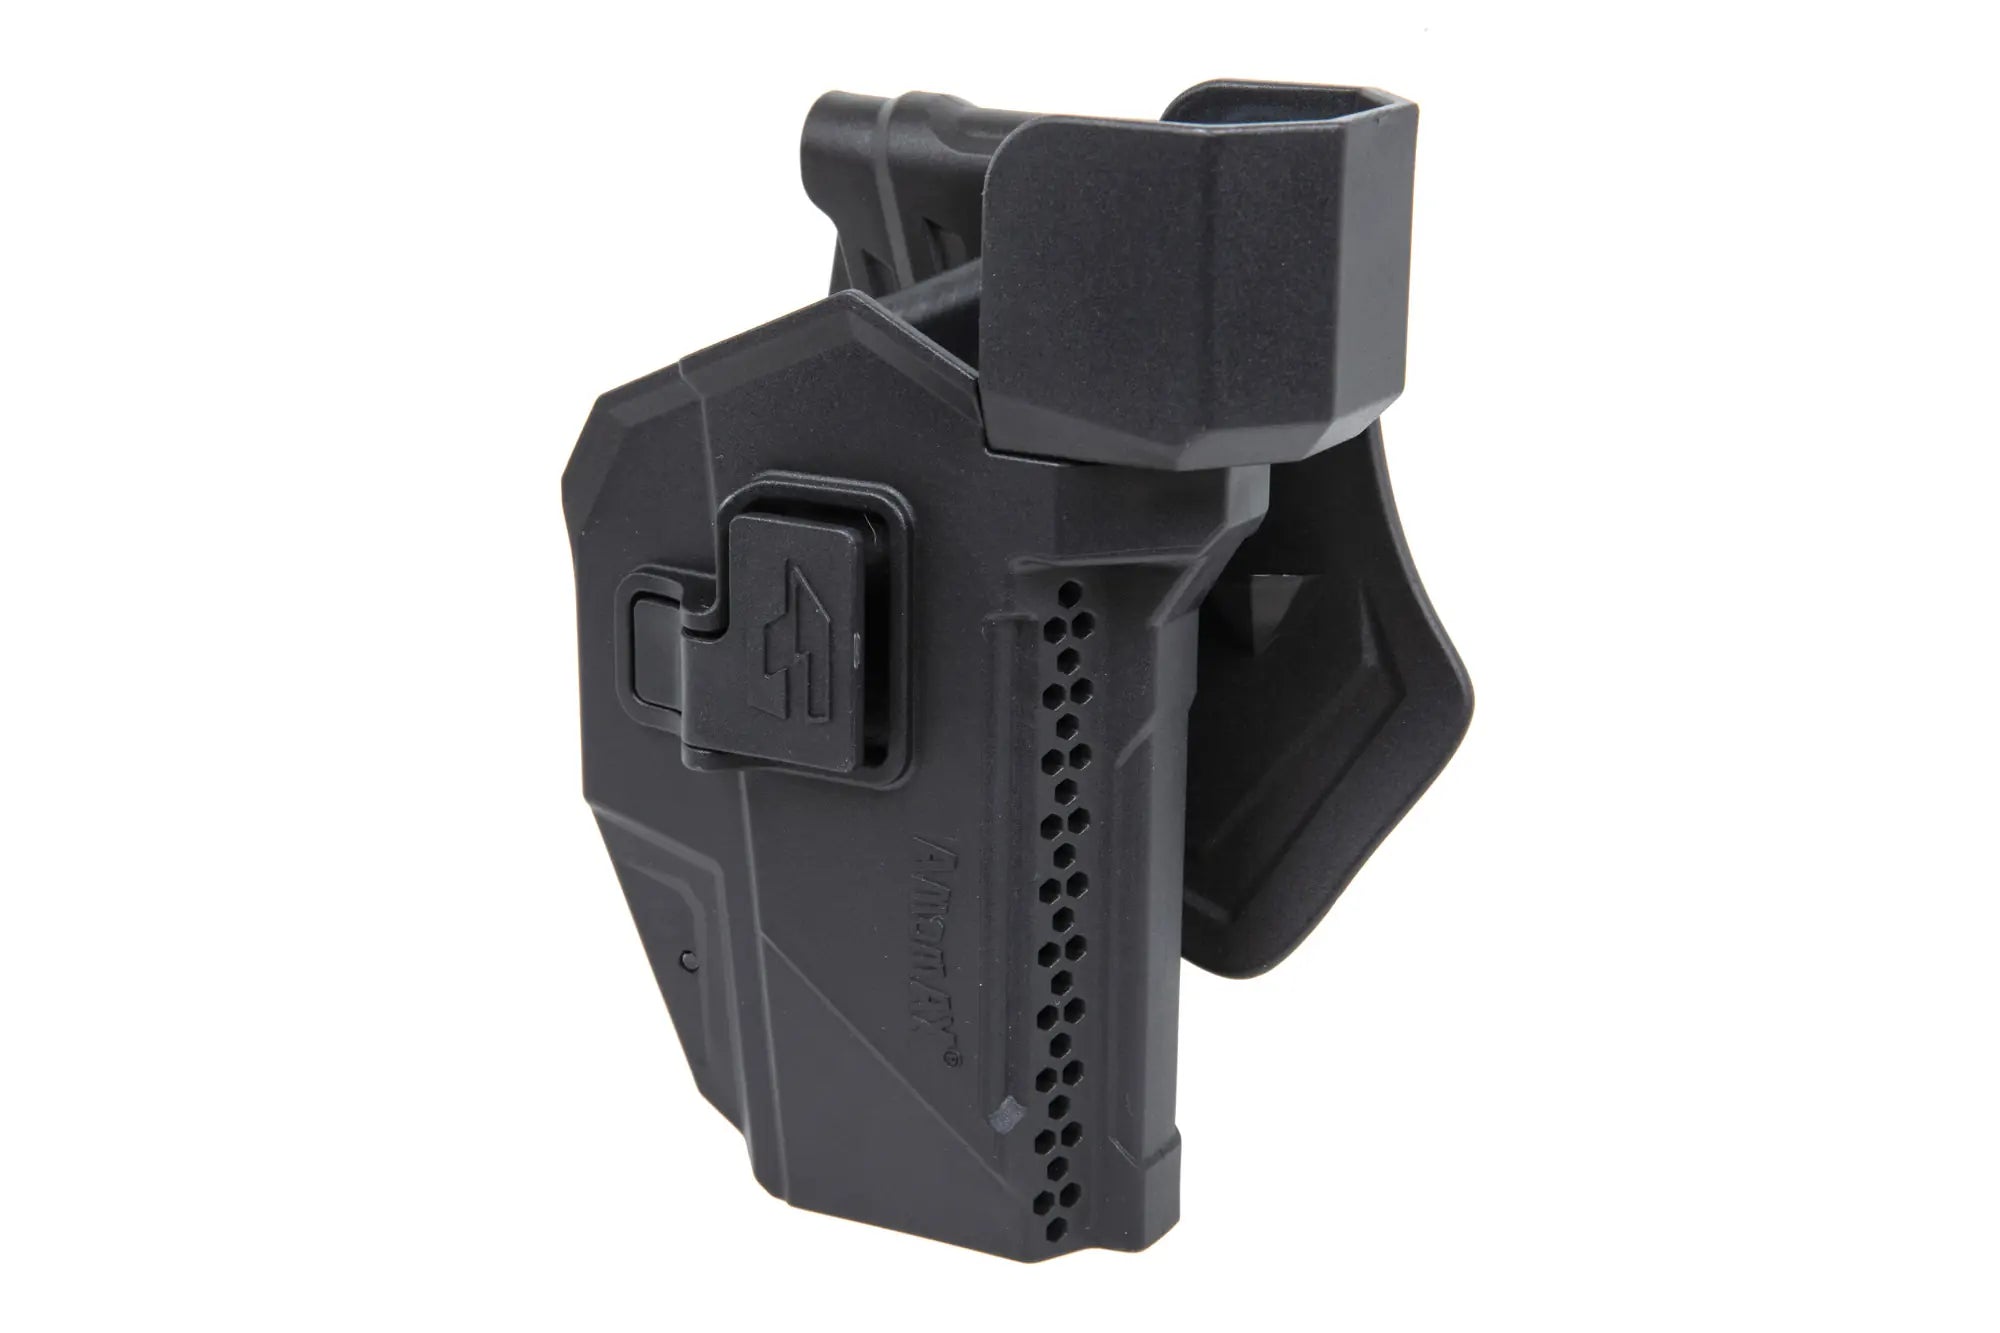 Amomax holster for Glock 19/23/32 type replicas with optics (right-handed) Black